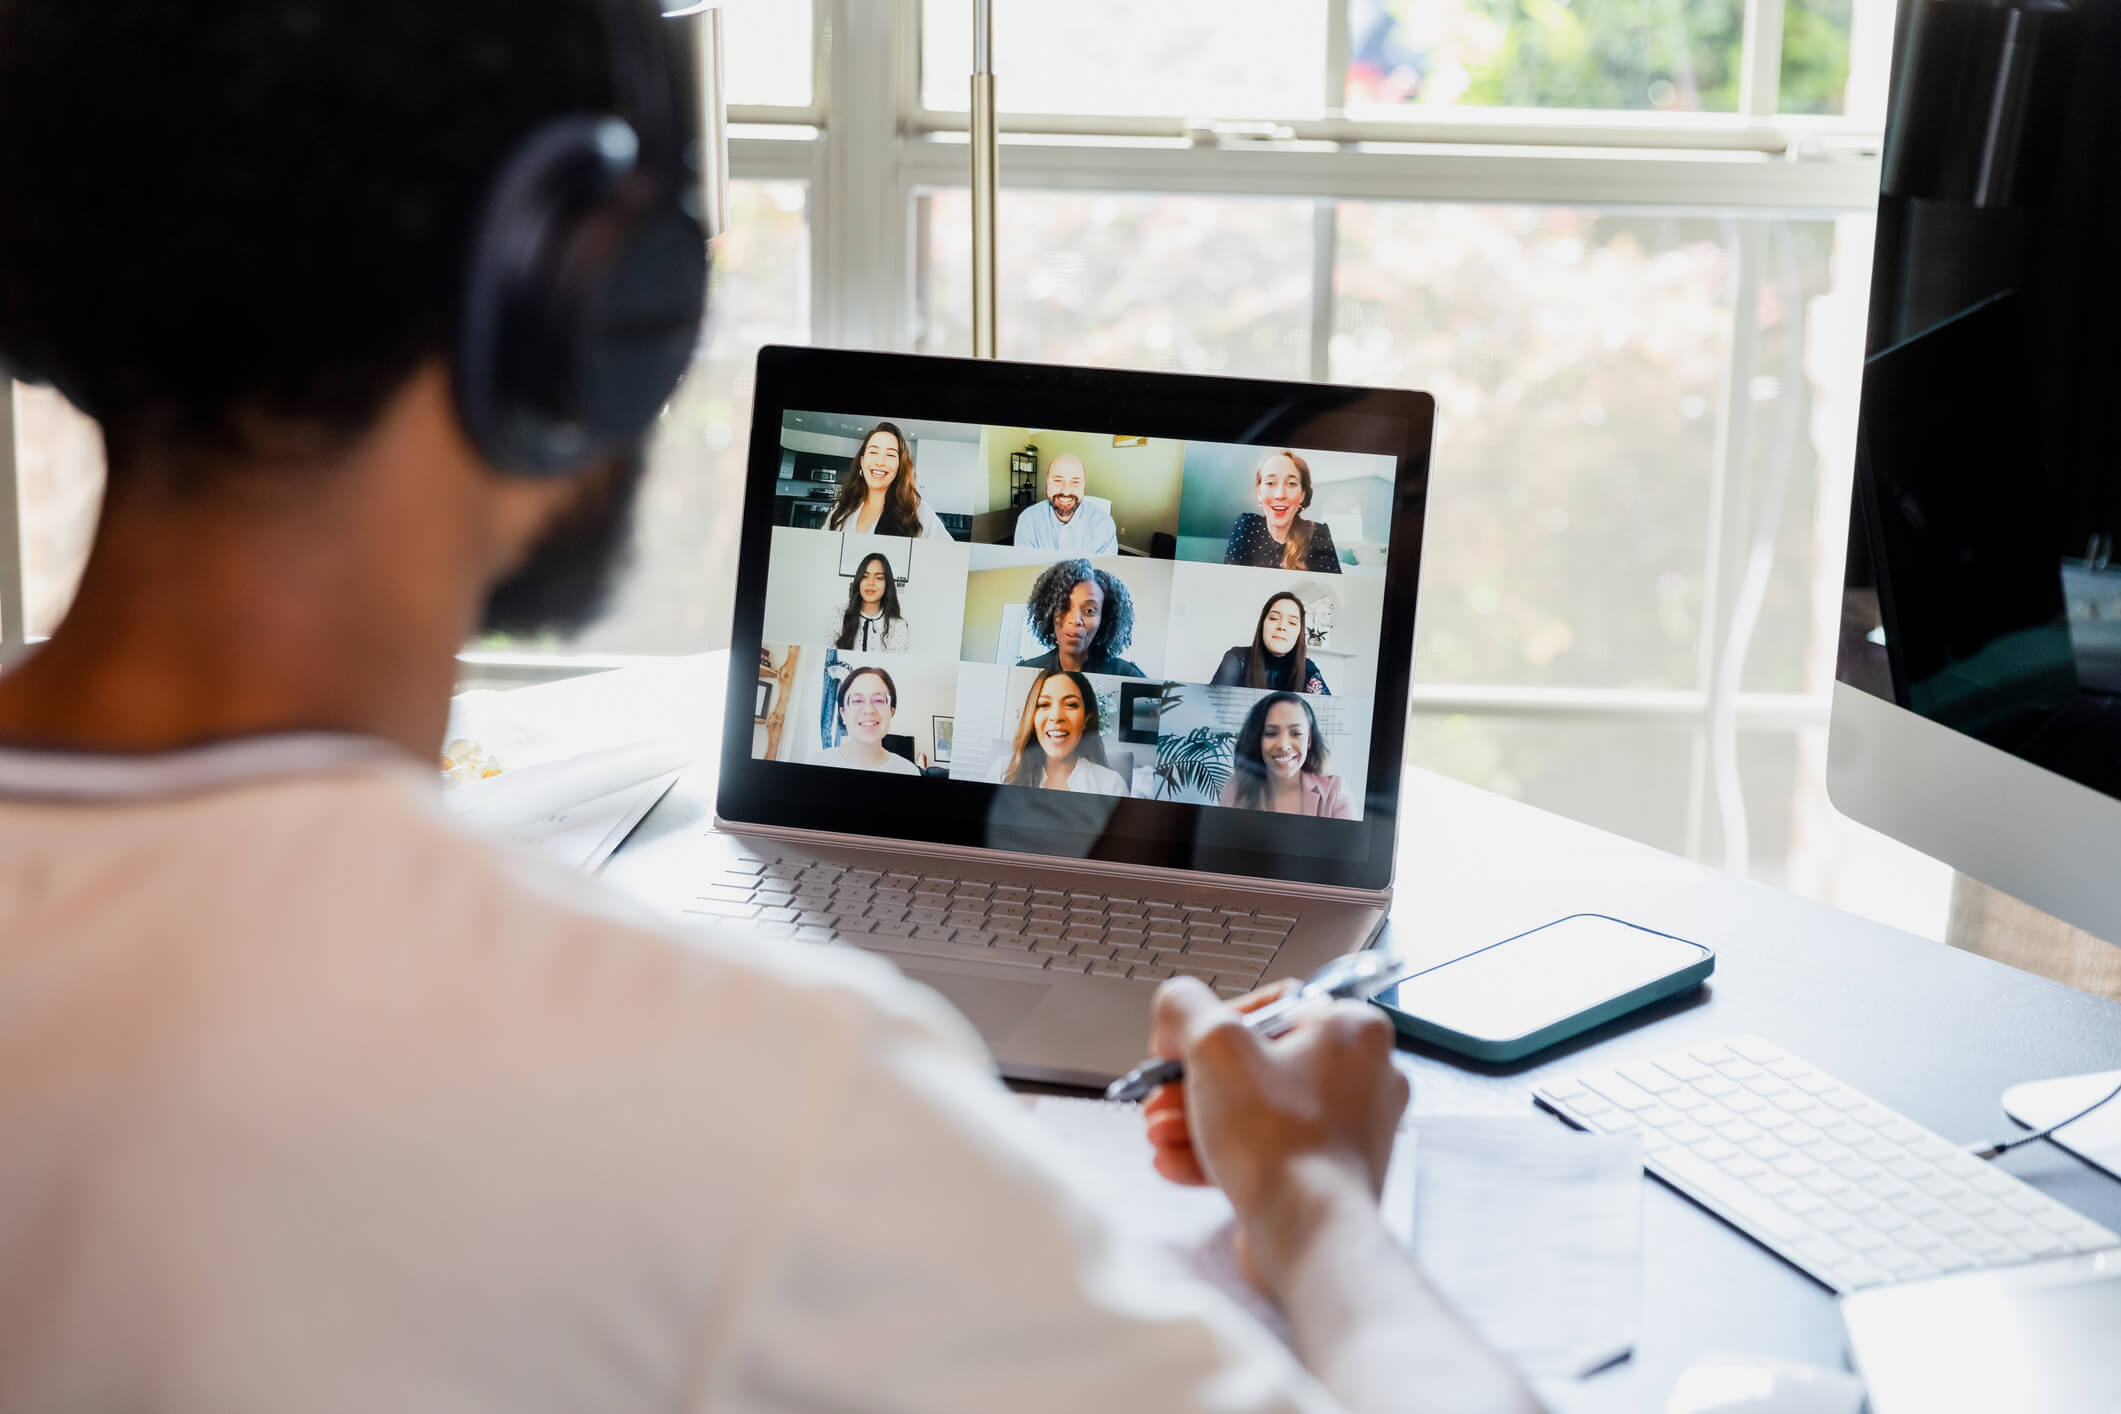 An over-the-shoulder view of a remote worker meeting online with colleagues